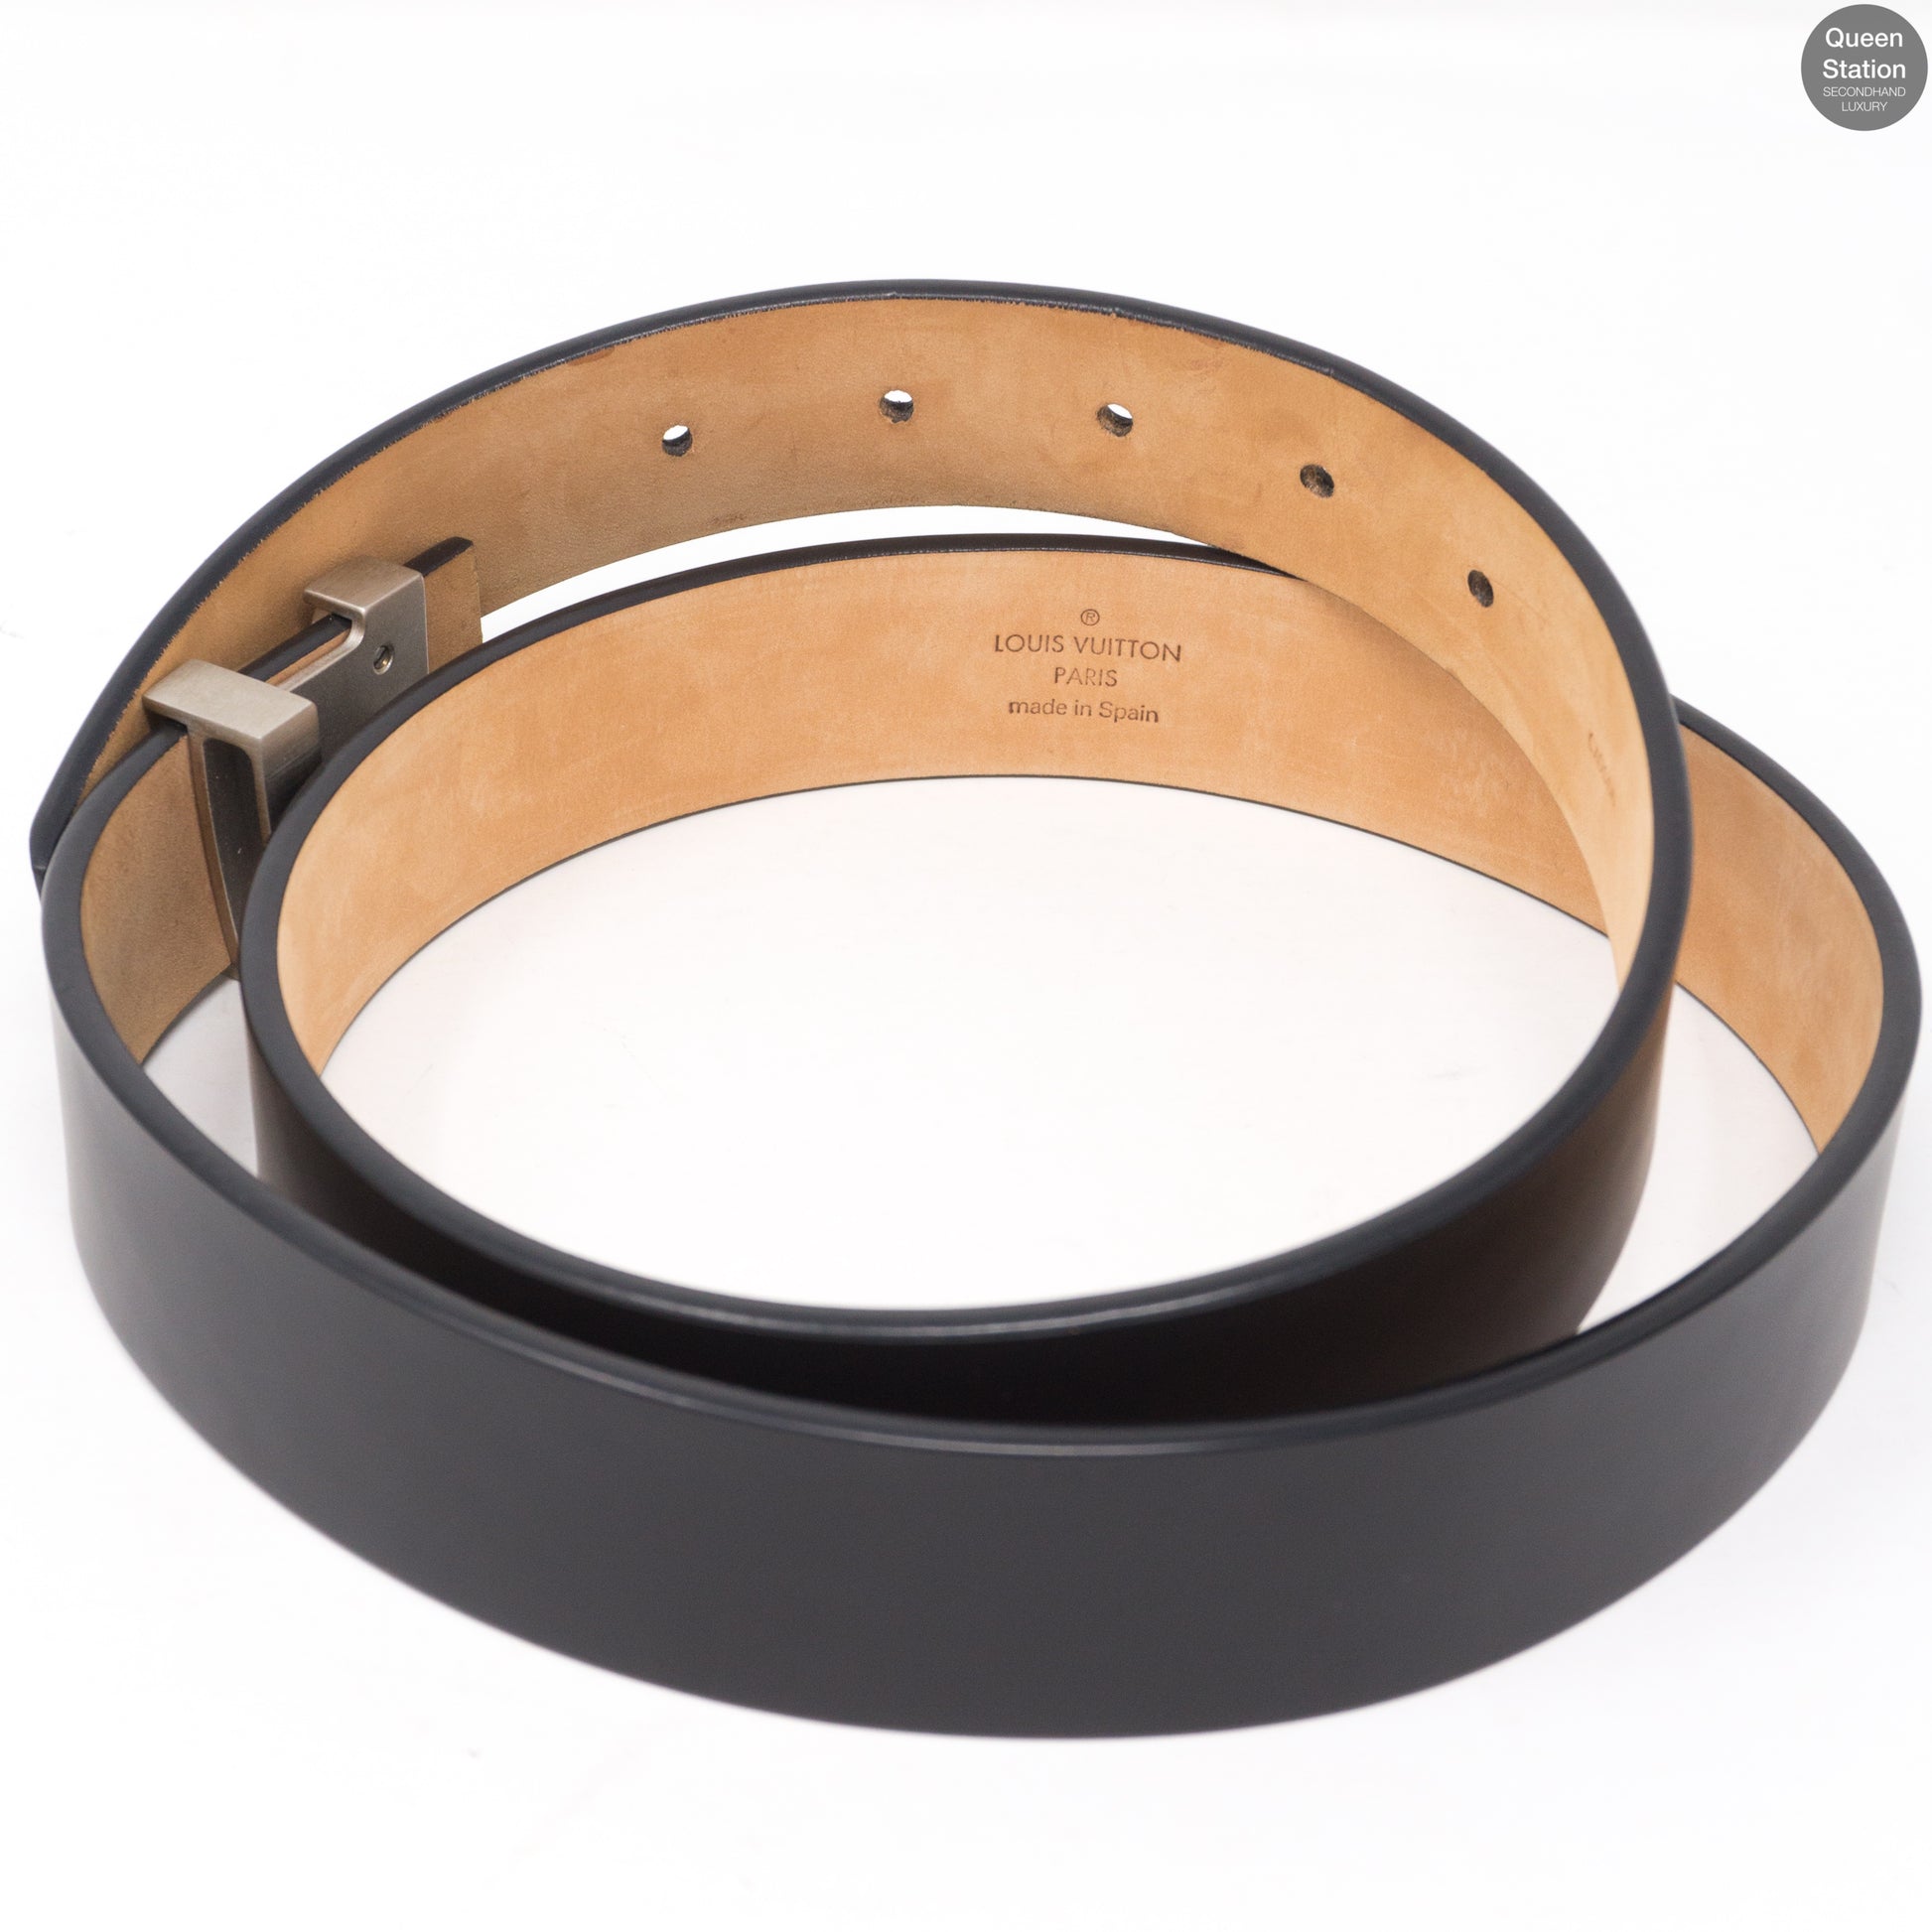 Initiales leather belt Louis Vuitton Grey size 85 cm in Leather - 31849265